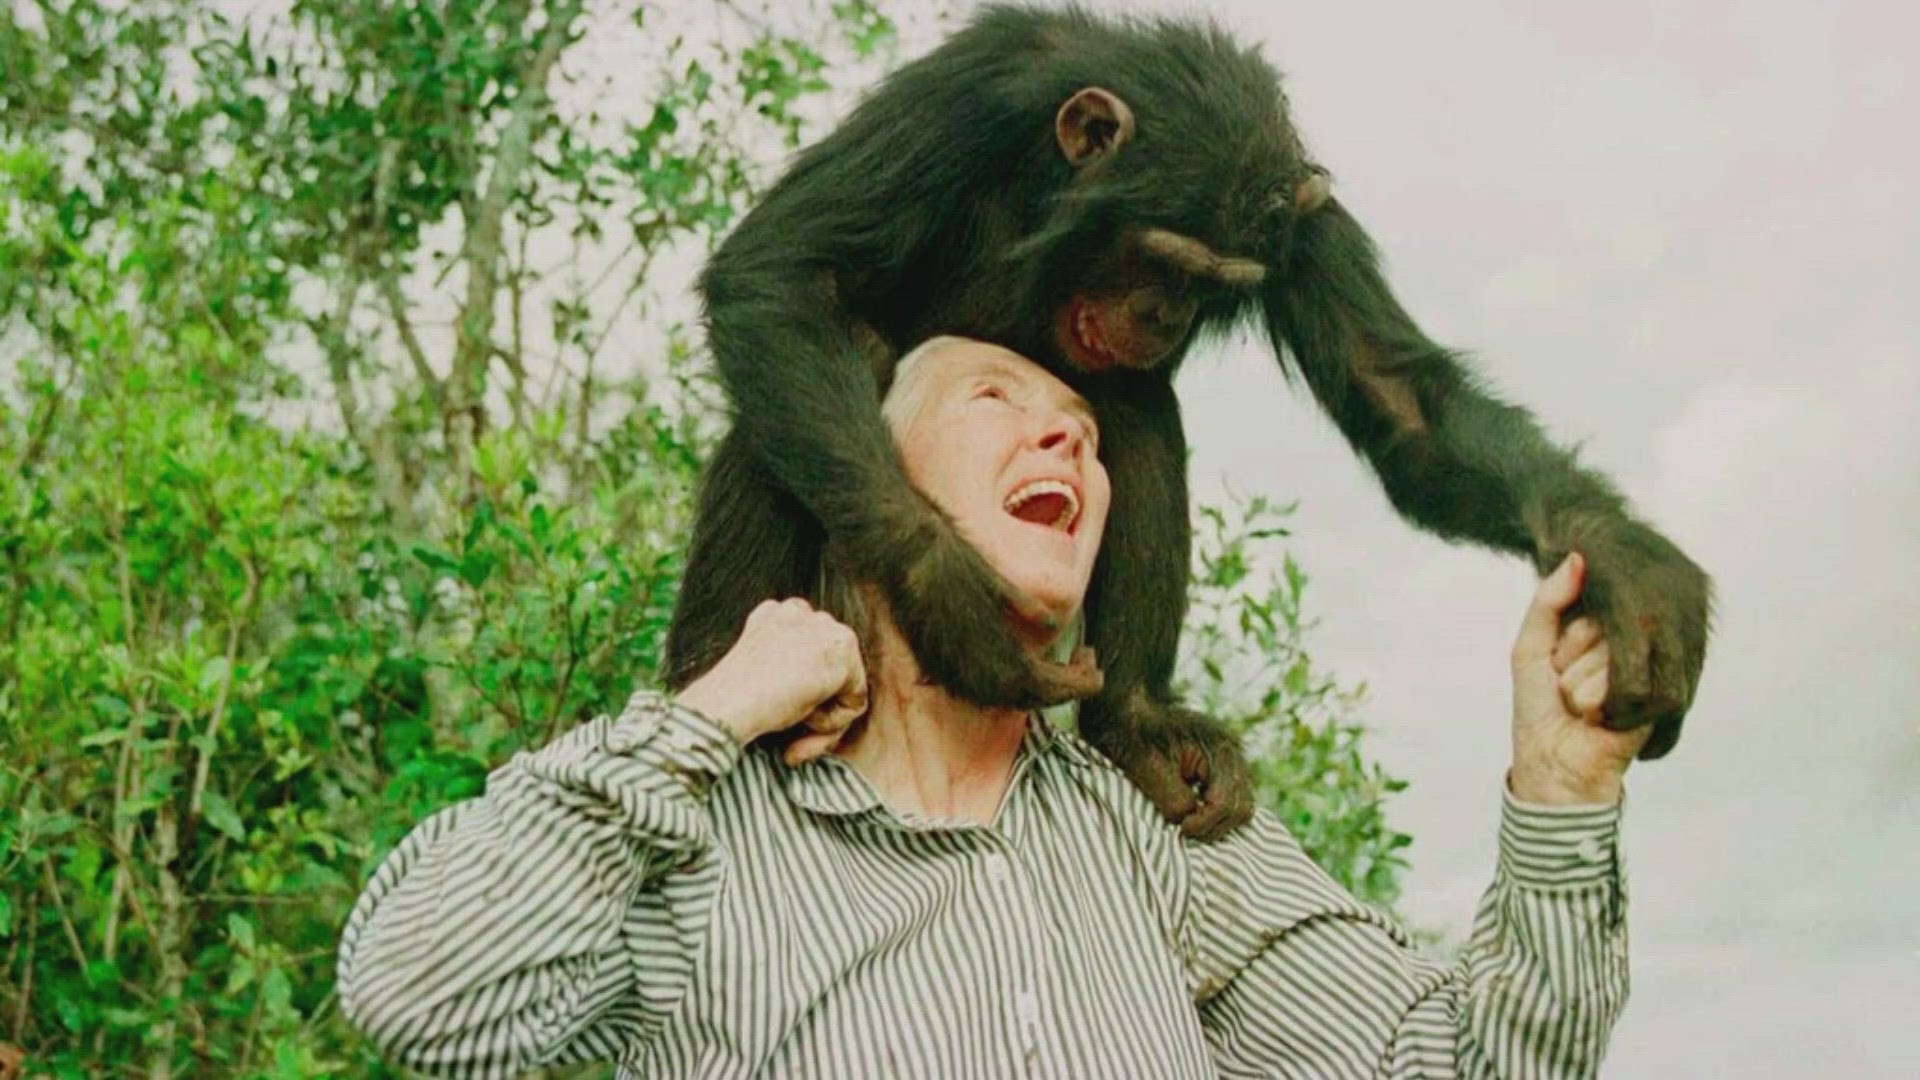 The pioneering conservationist and researcher knows more about chimpanzees perhaps more than anyone else in the world.